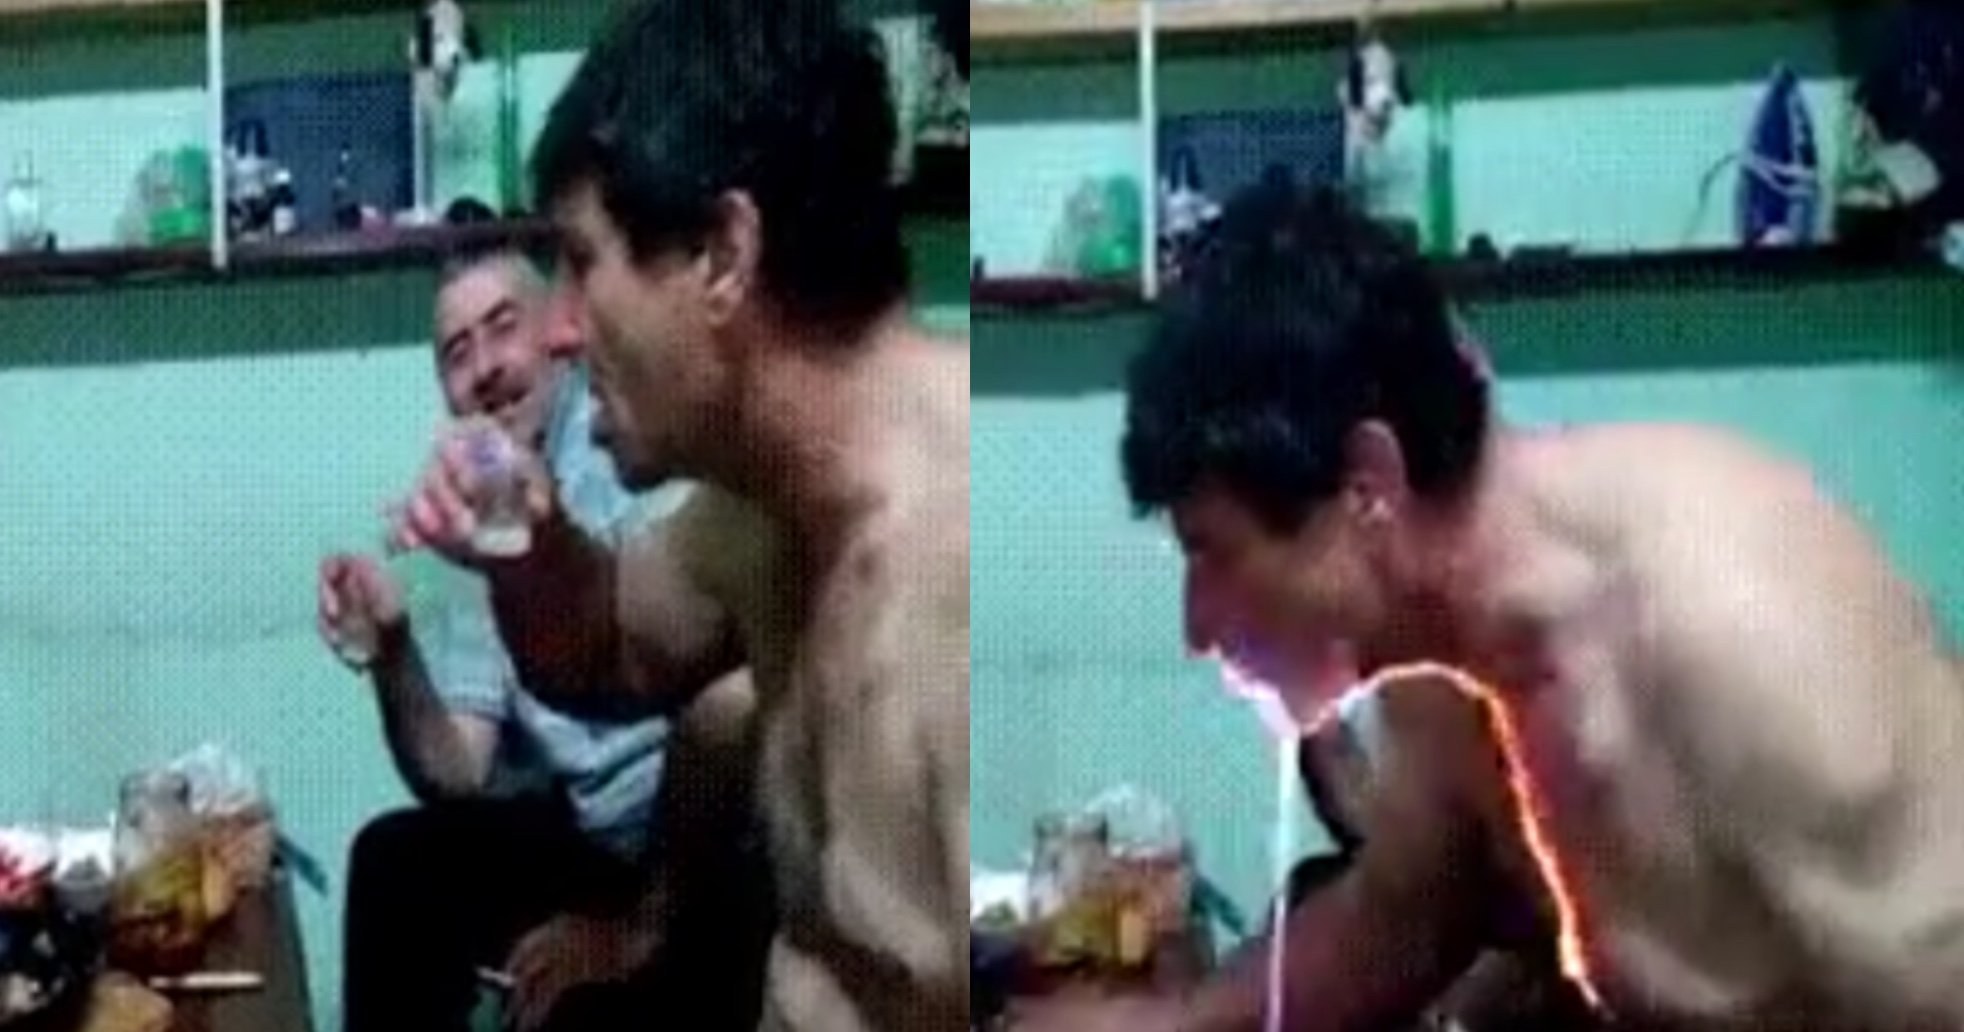 flaming.jpg?resize=1200,630 - A Video Of A Man's Throat Burning After Drinking A 96-Percent Alcohol Goes Viral